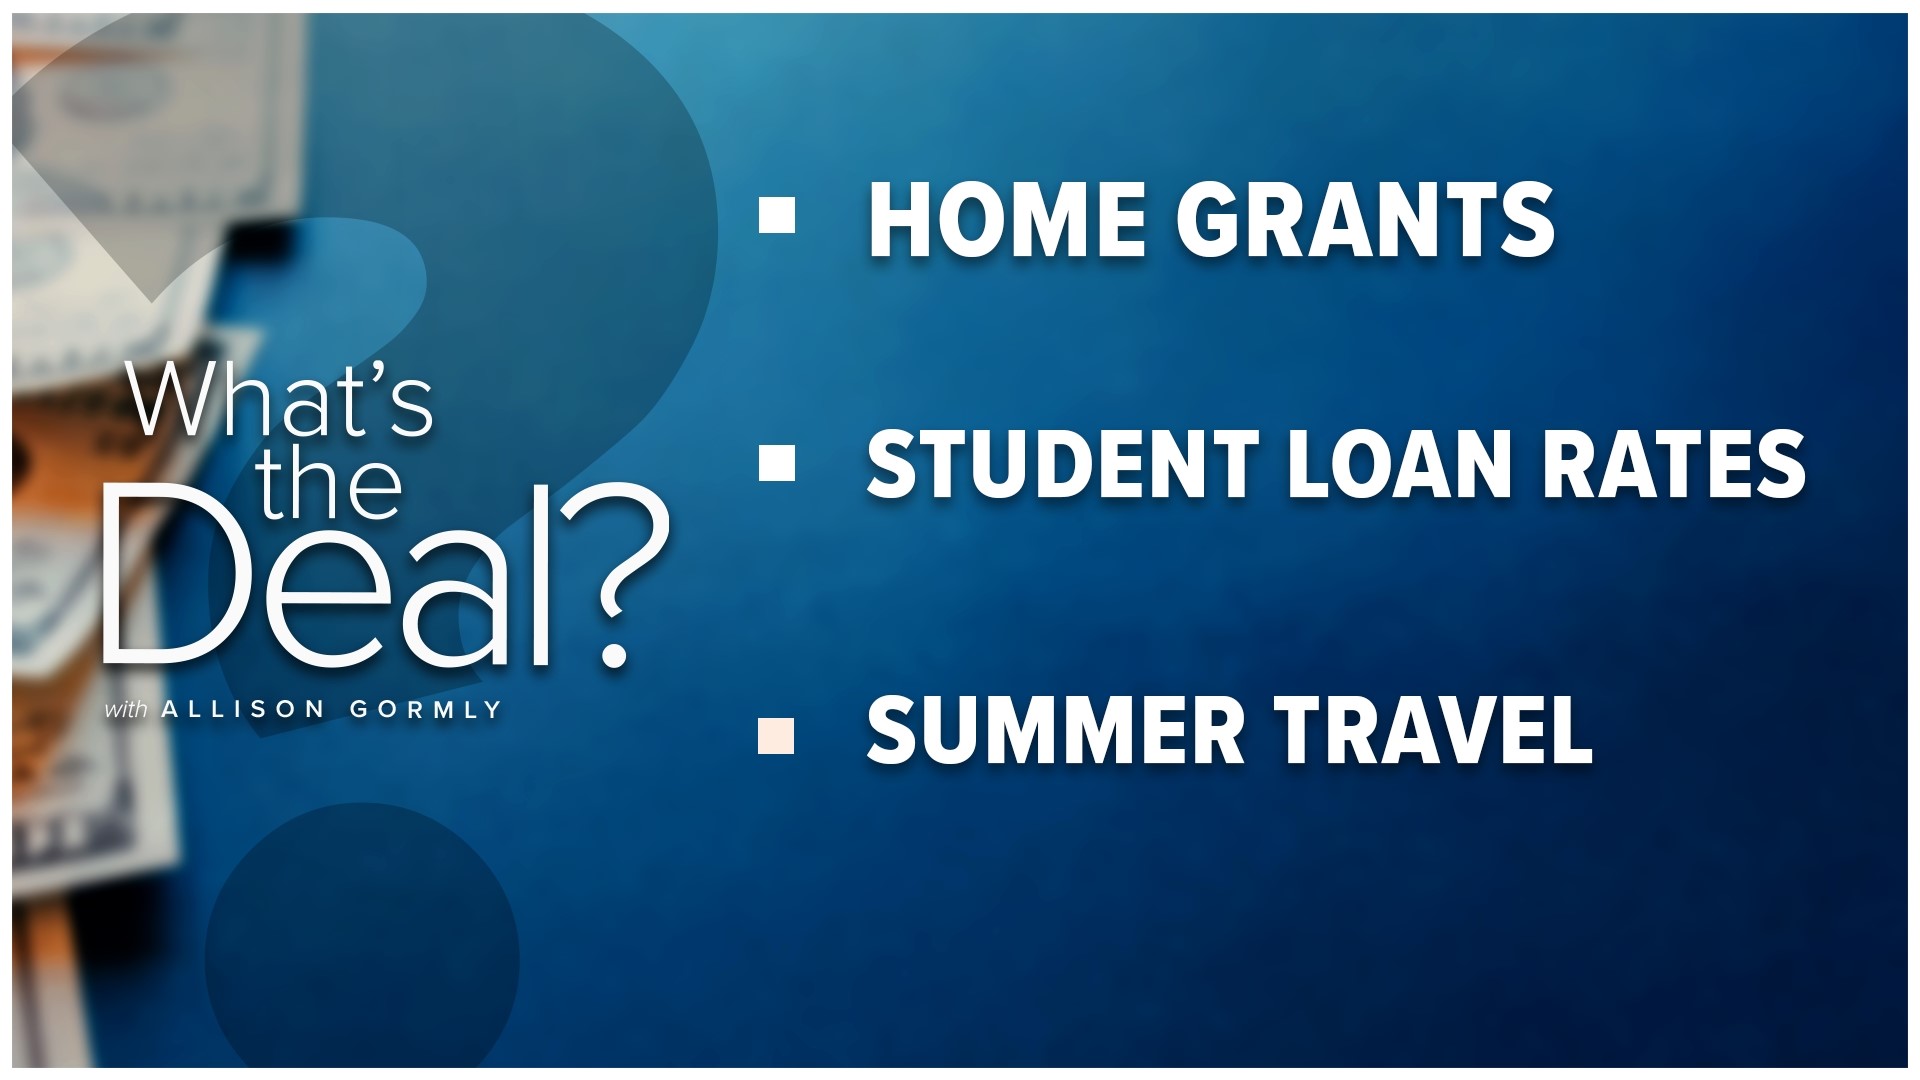 How to make sense of home grants being offered in certain areas and what to know about student loan rates. Plus ways to save on summer travel.